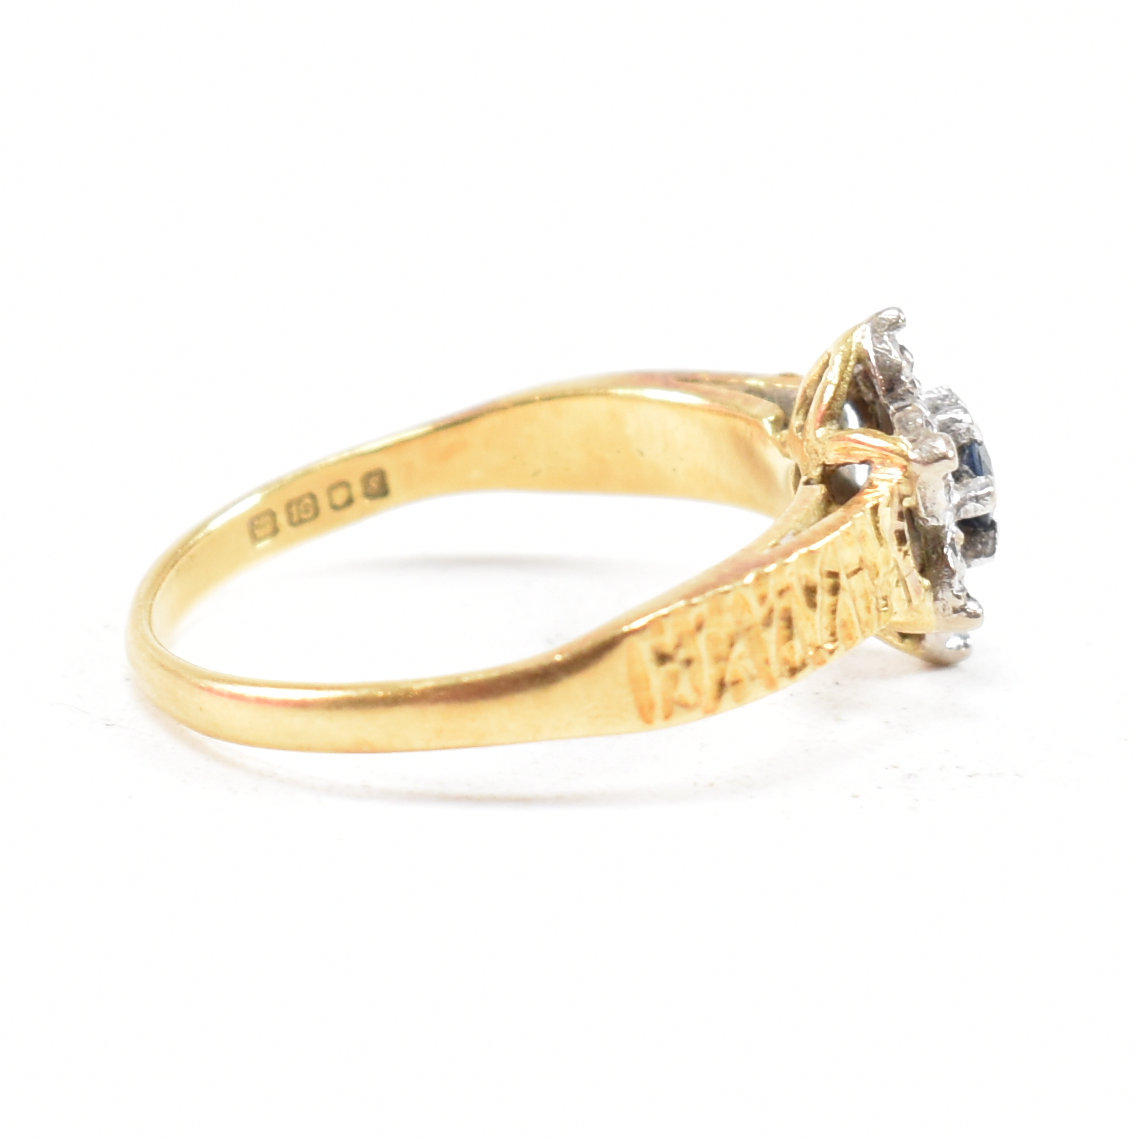 HALLMARKED 18CT GOLD SAPPHIRE CLUSTER RING - Image 2 of 9